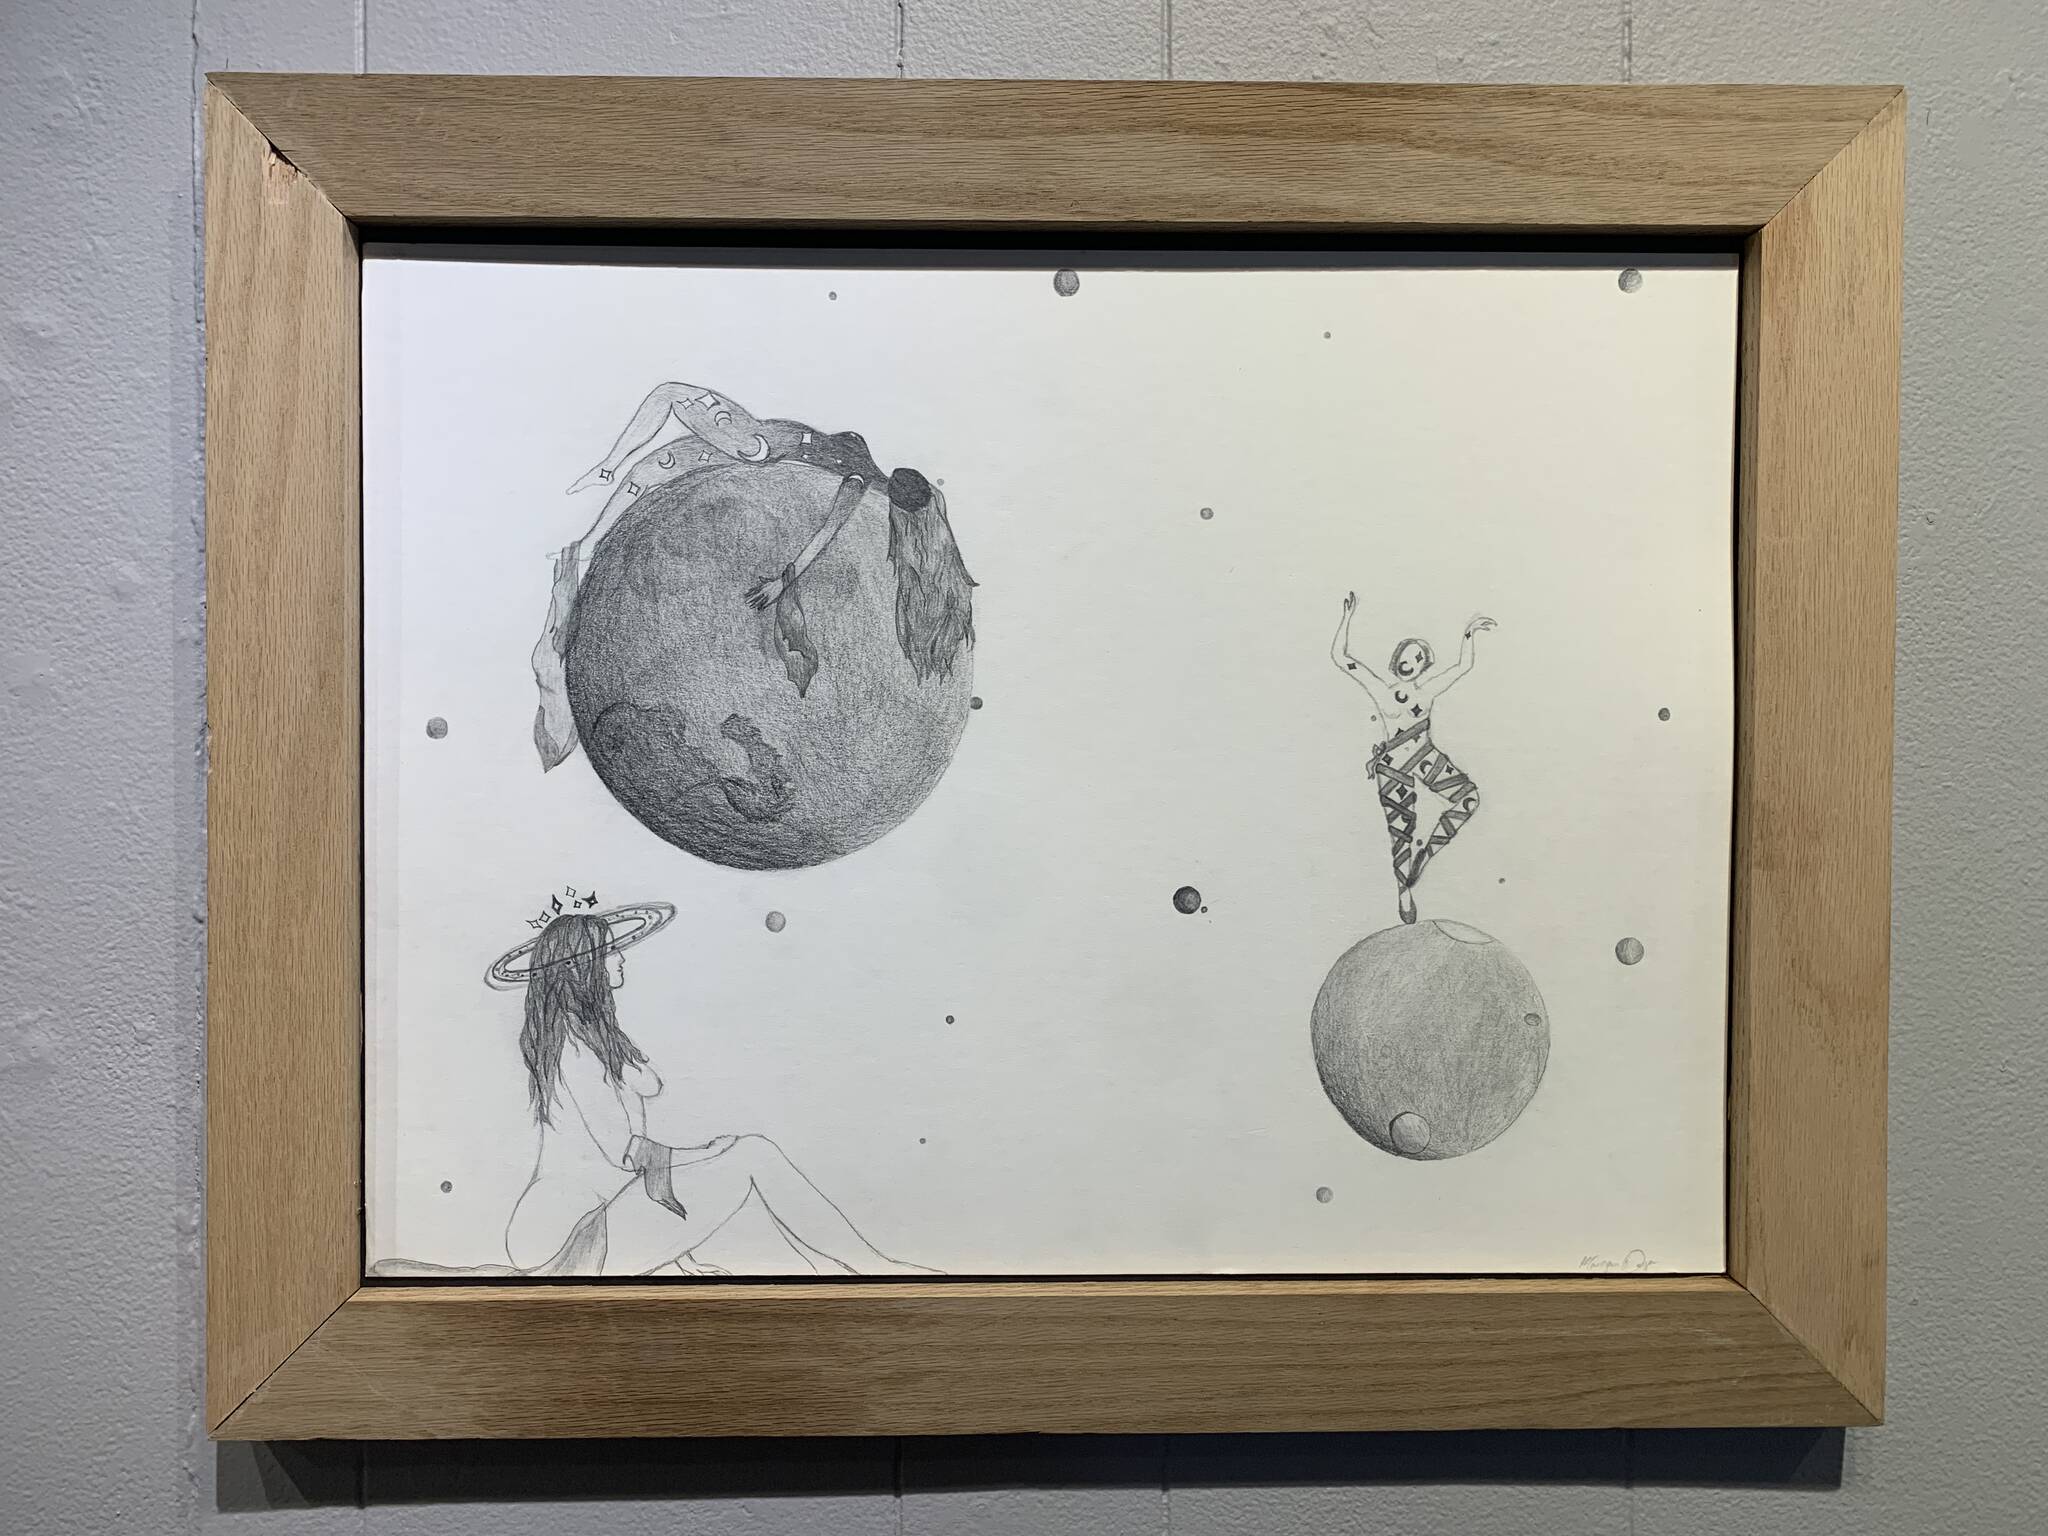 “Moon Dancing,” graphite on paper by Morgan Dwyer, is on display at Homer Council on the Arts through March as part of the “Bodily Autonomy” exhibit co-sponsored by Kachemak Bay Family Planning Clinic. (Photo by Christina Whiting/Homer News)